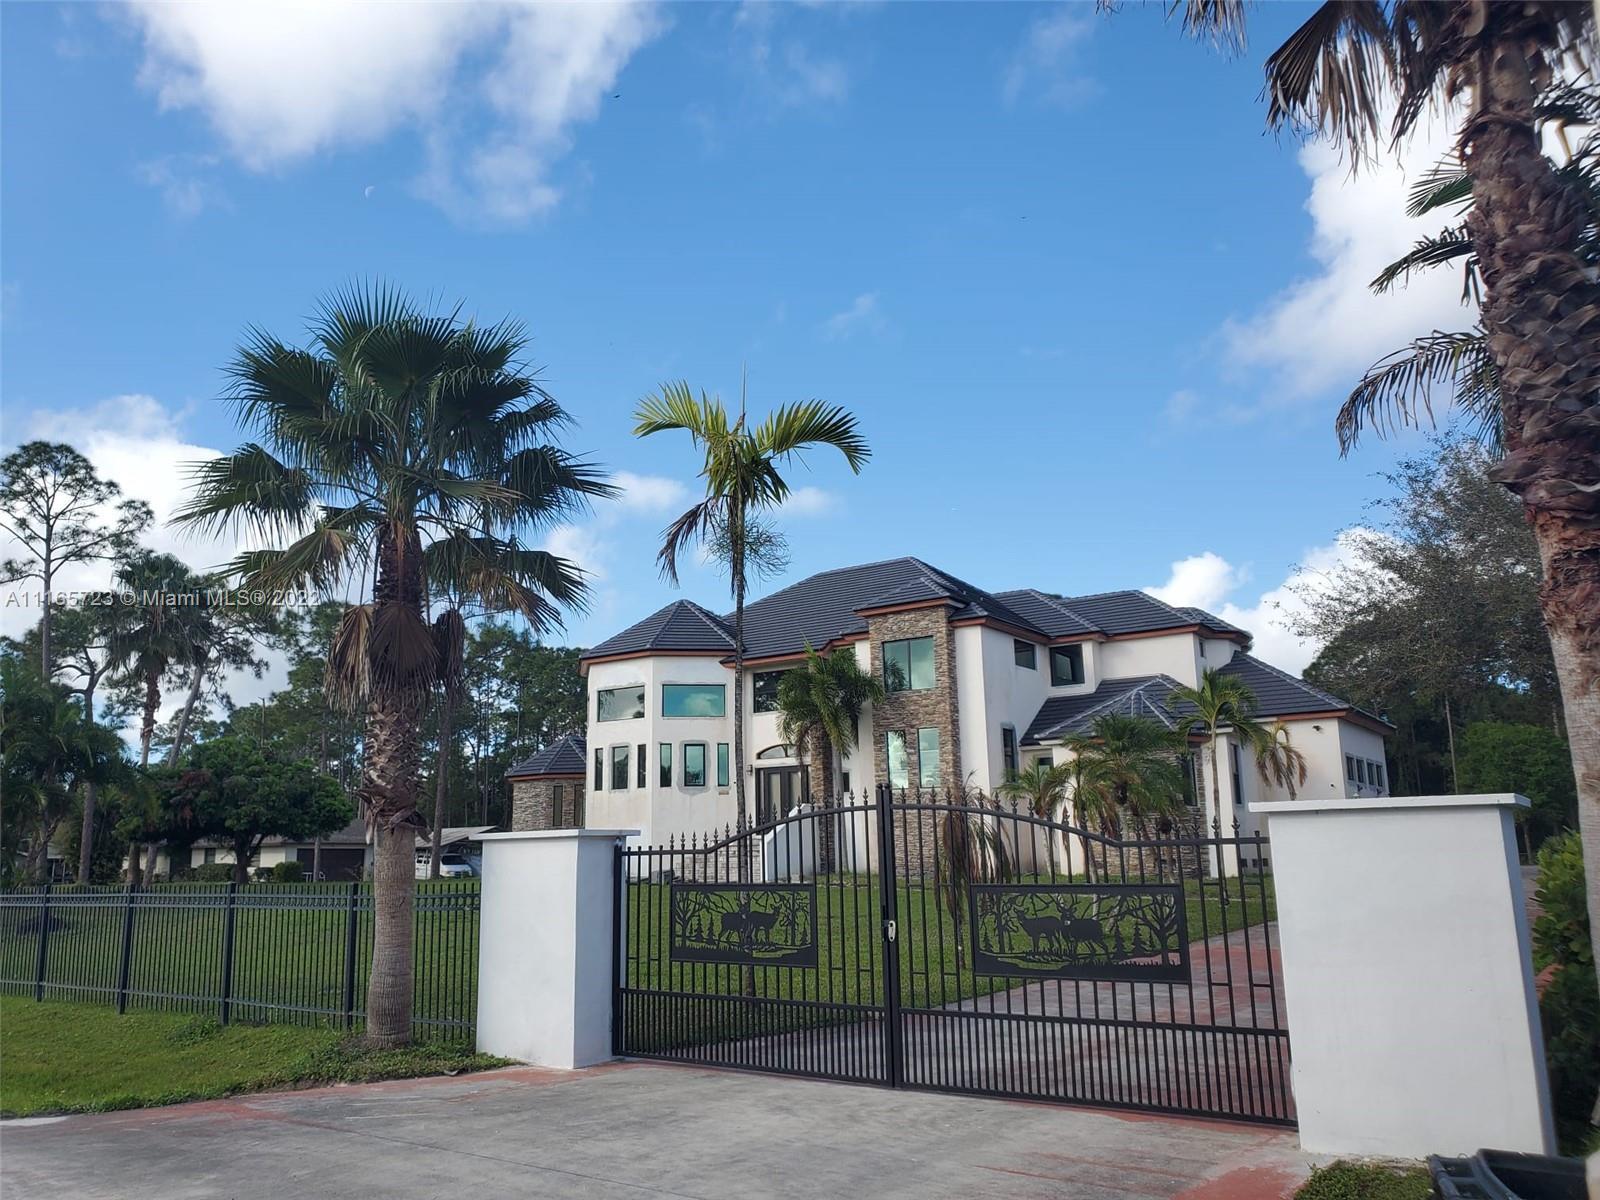 Renovations Complete! Stunning estate home in Jupiter Farms. This extensively renovated, 5300 sq. ft